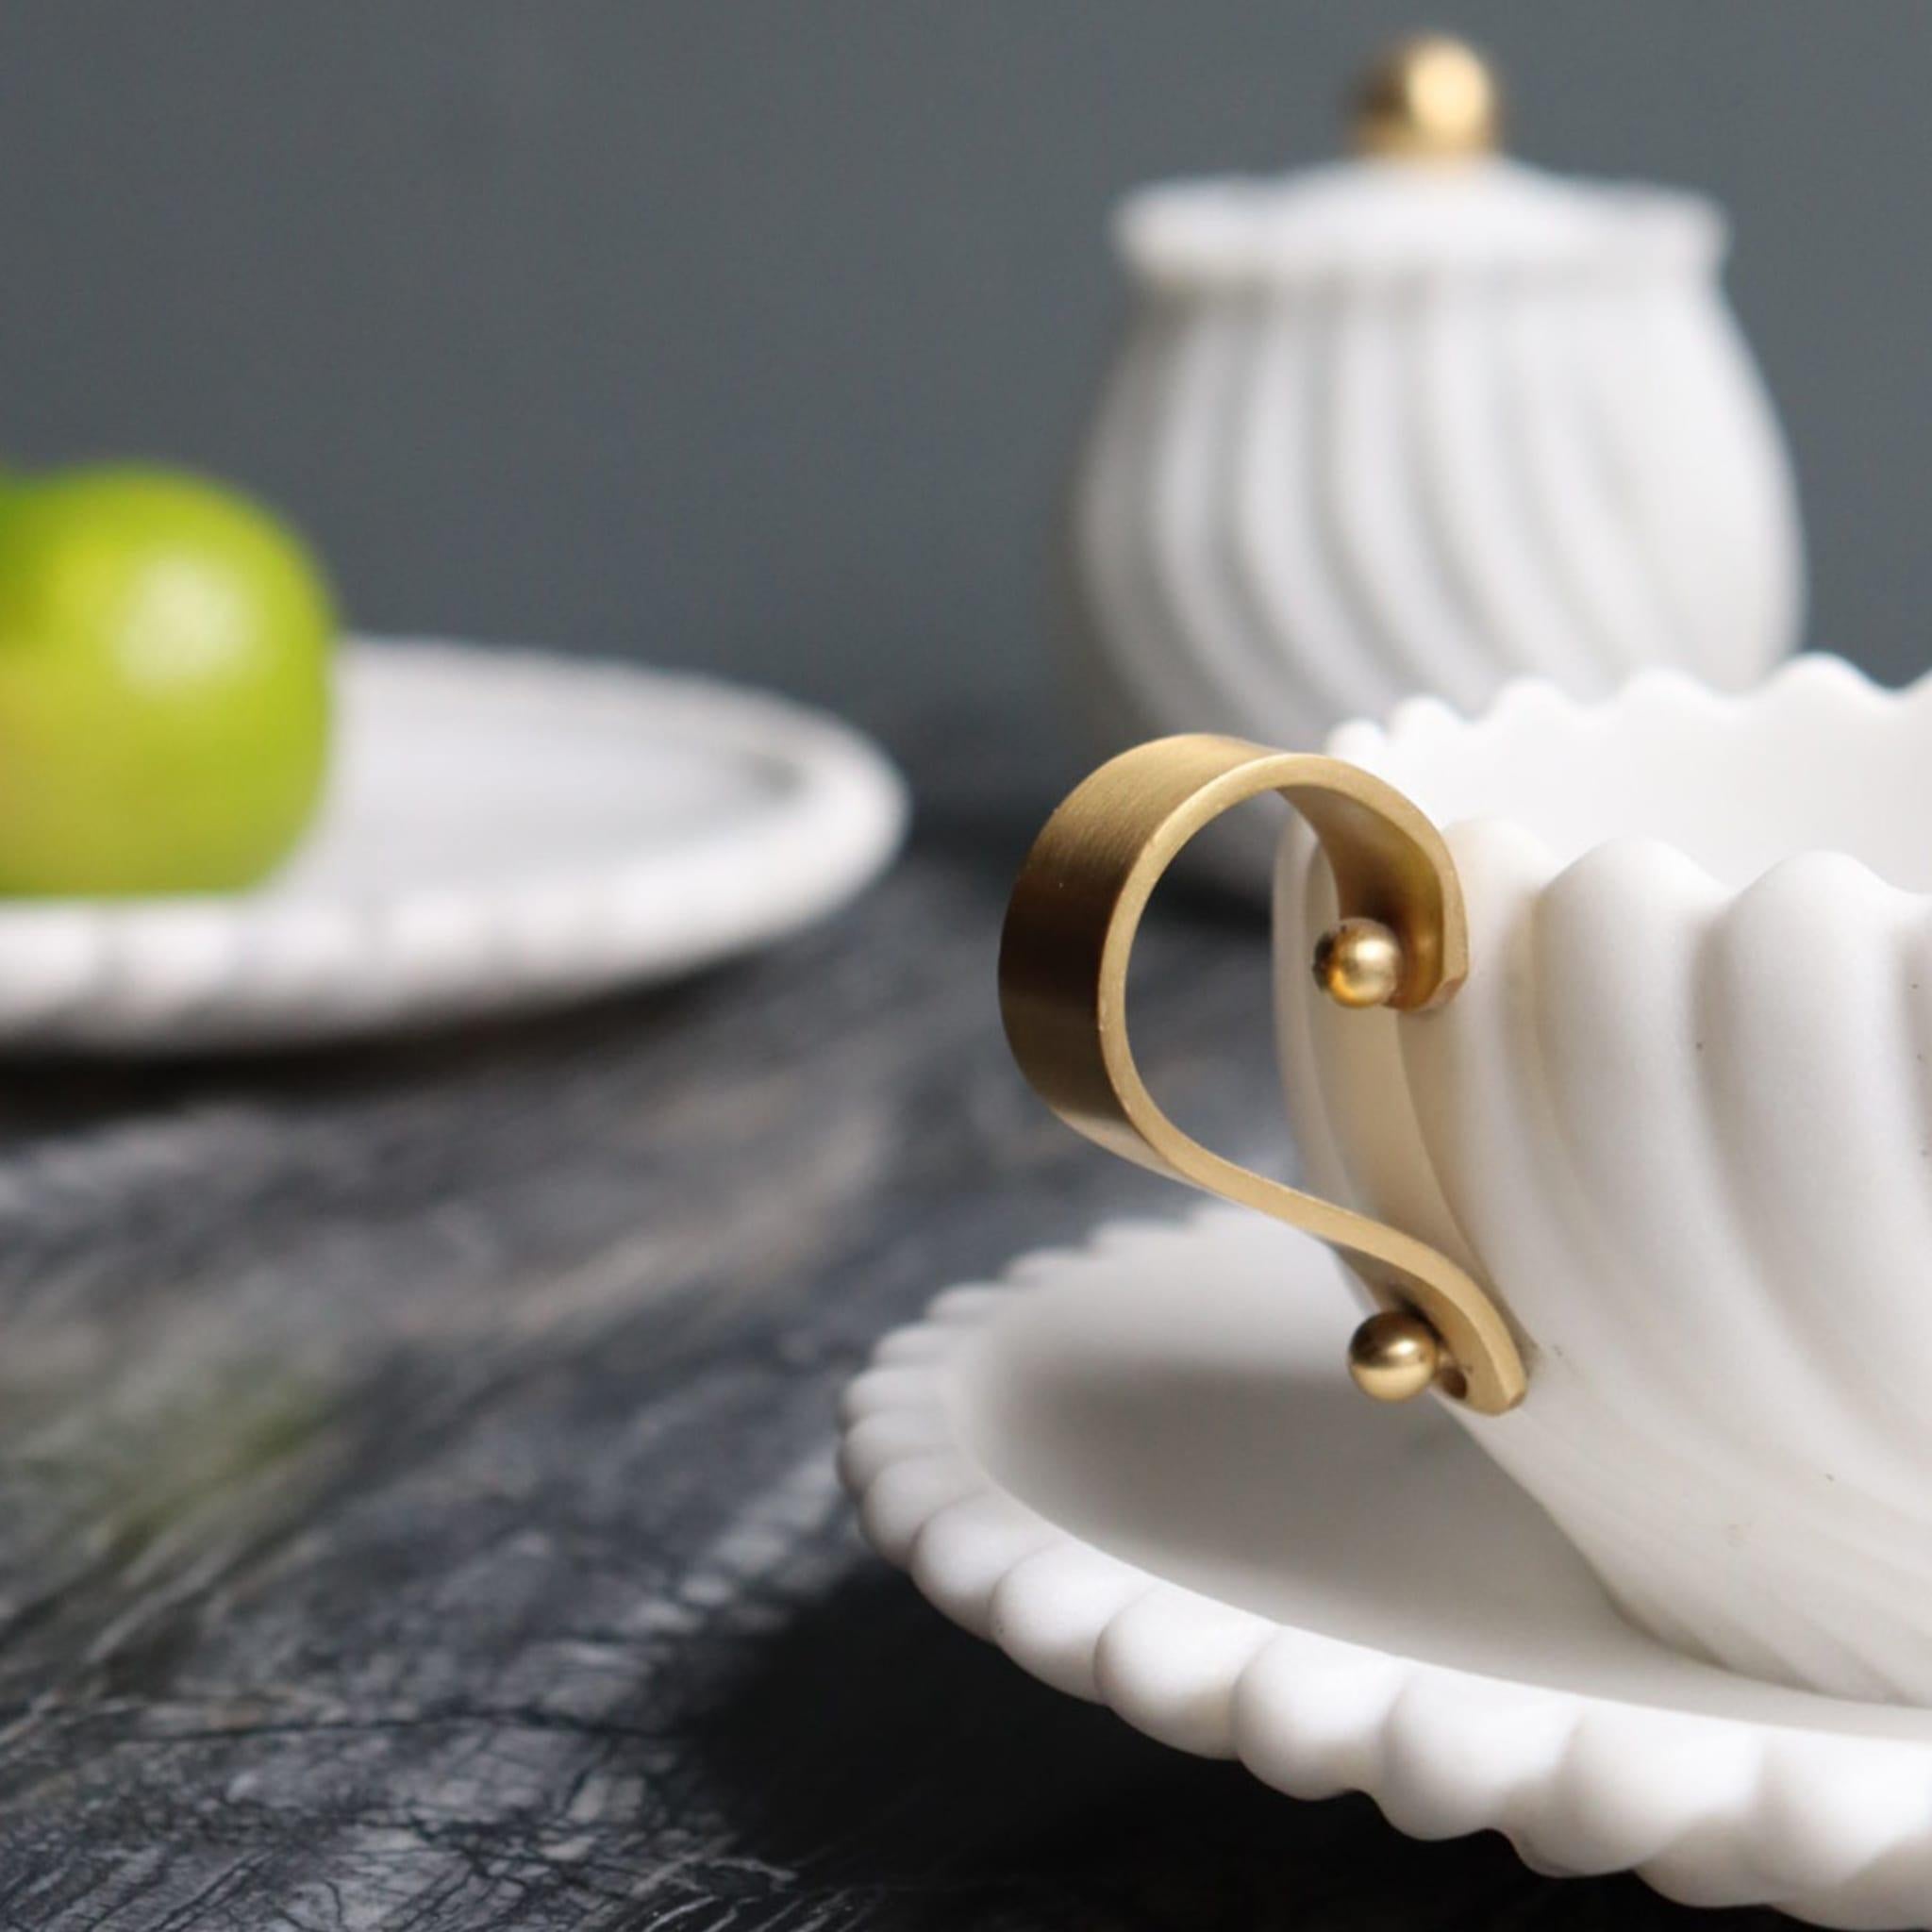 This charming teacup with saucer is part of the Victoria tea set, inspired by the British afternoon tea tradition and hand-crafted using Arabescato marble. The iconic precious stone gives a luxurious accent to this piece that can be enjoyed alone or